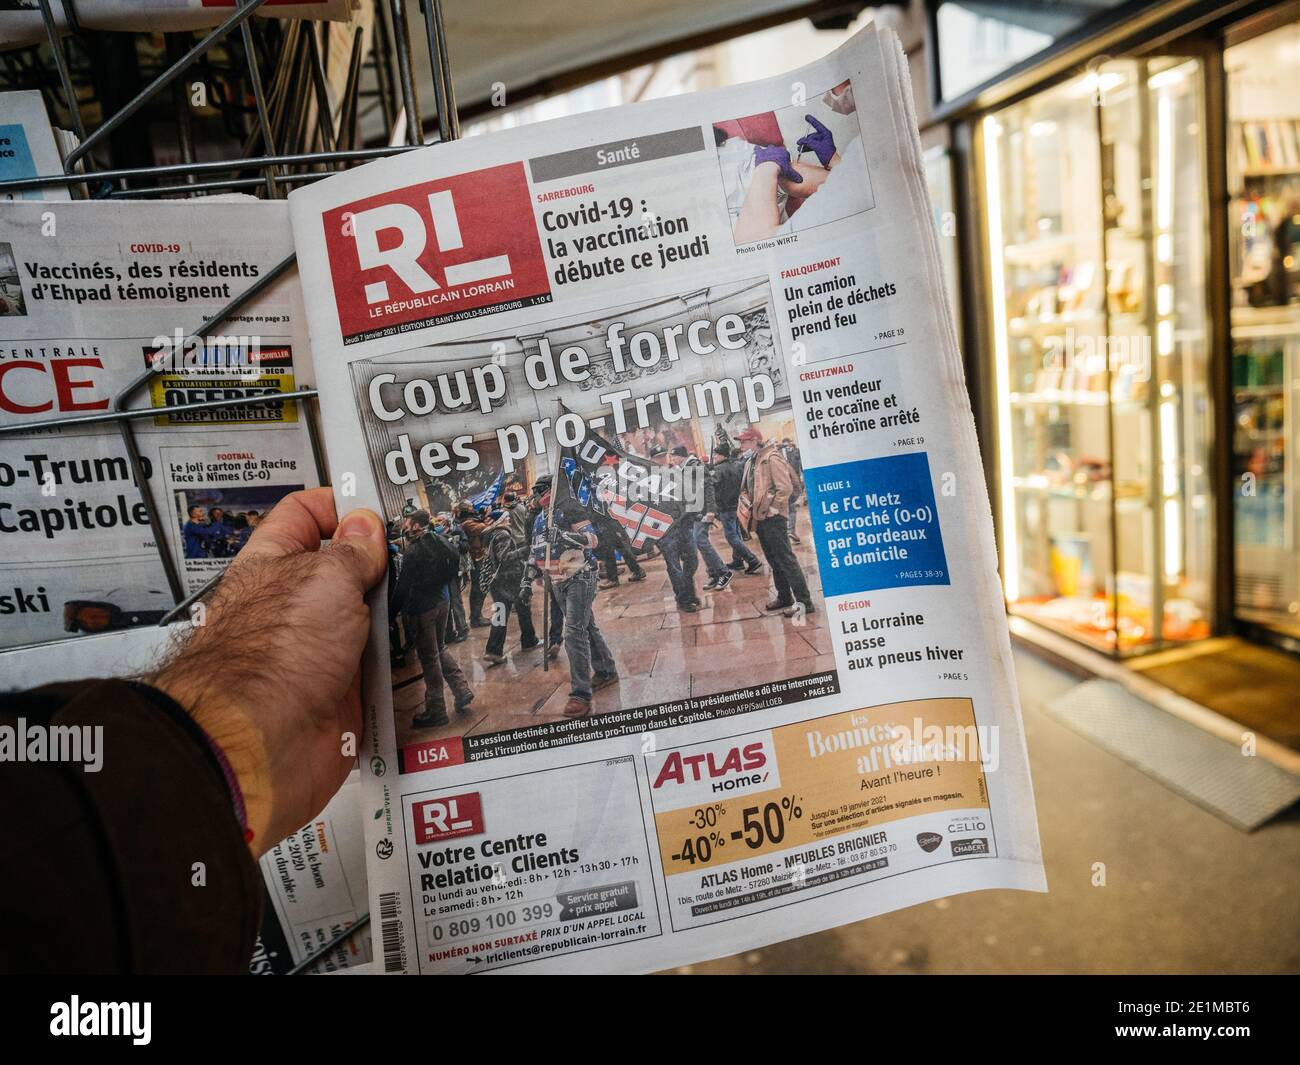 Paris, France - Jan 7, 2020: French newspaper Le republicain Lorrain front page show storming of the U.S. Capitol by supporters of U.S. President Dona Stock Photo